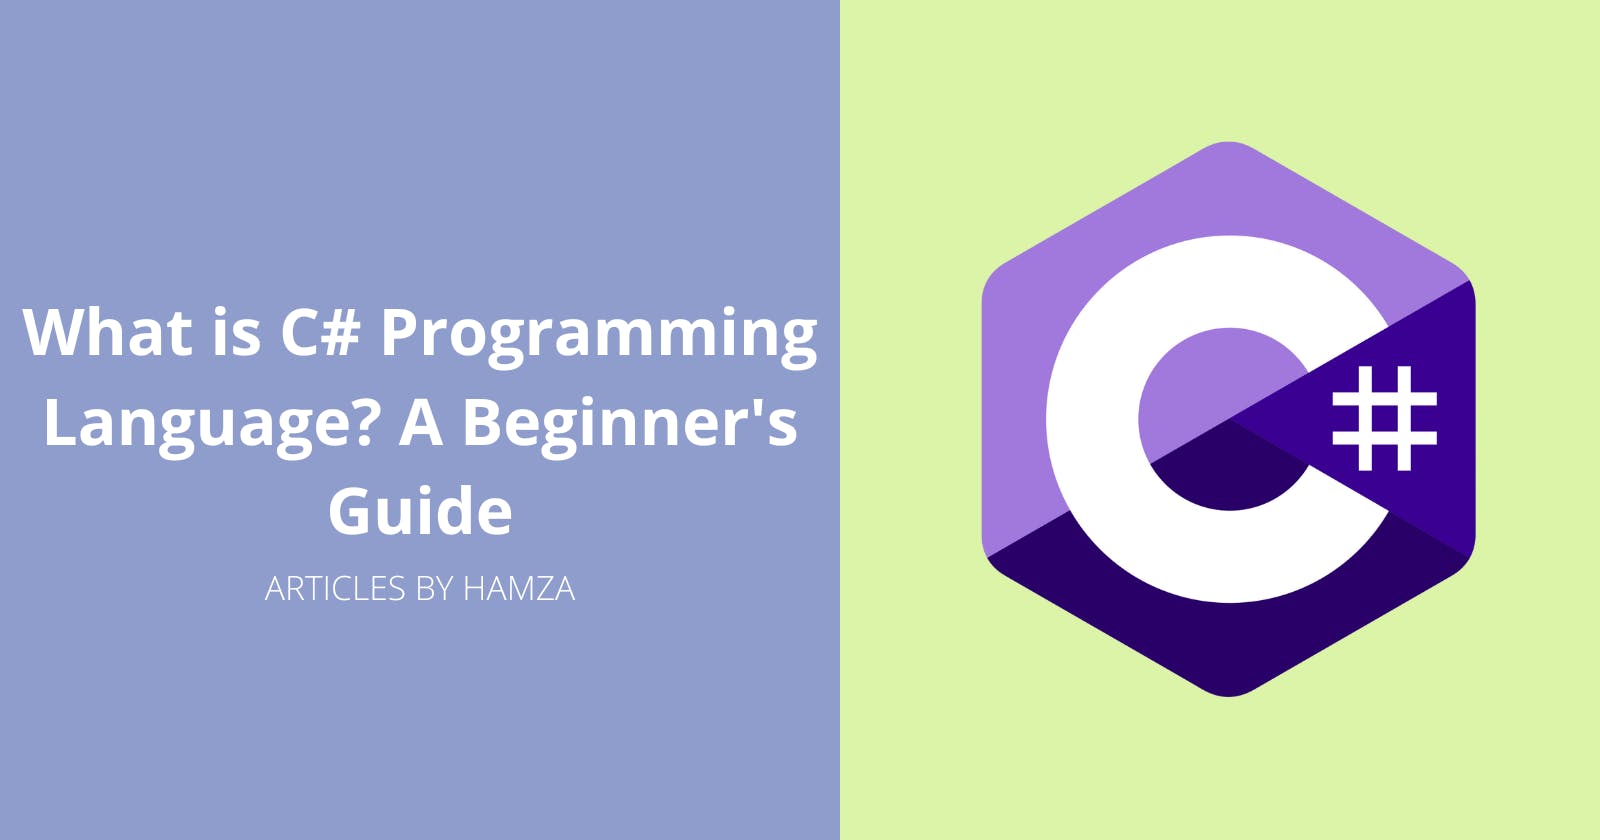 What is C# Programming Language? A Beginner's Guide